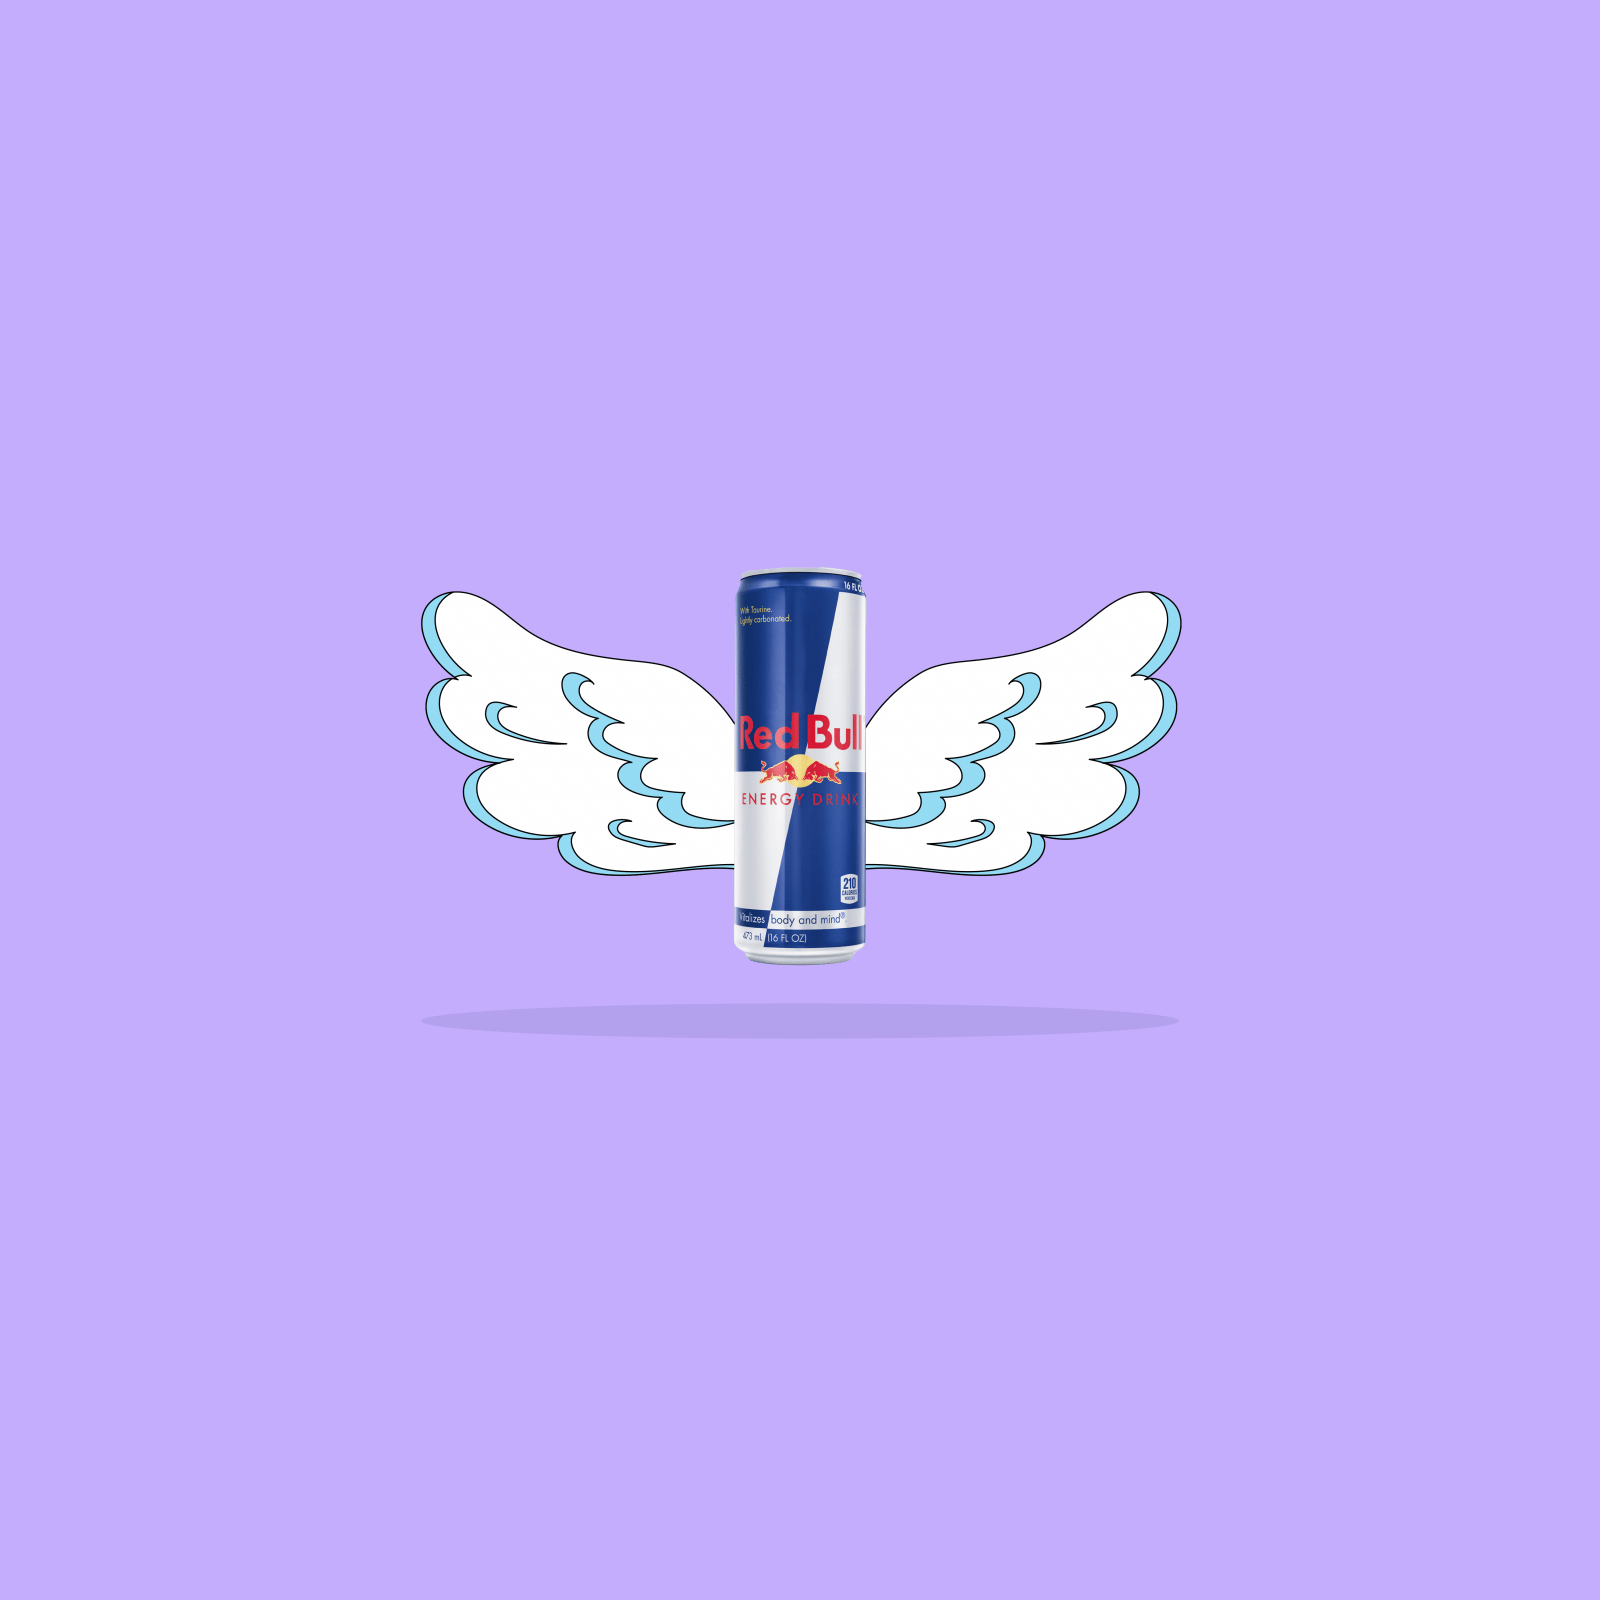 How to Get Wings: Red Bull’s Accelerating Marketing Strategies